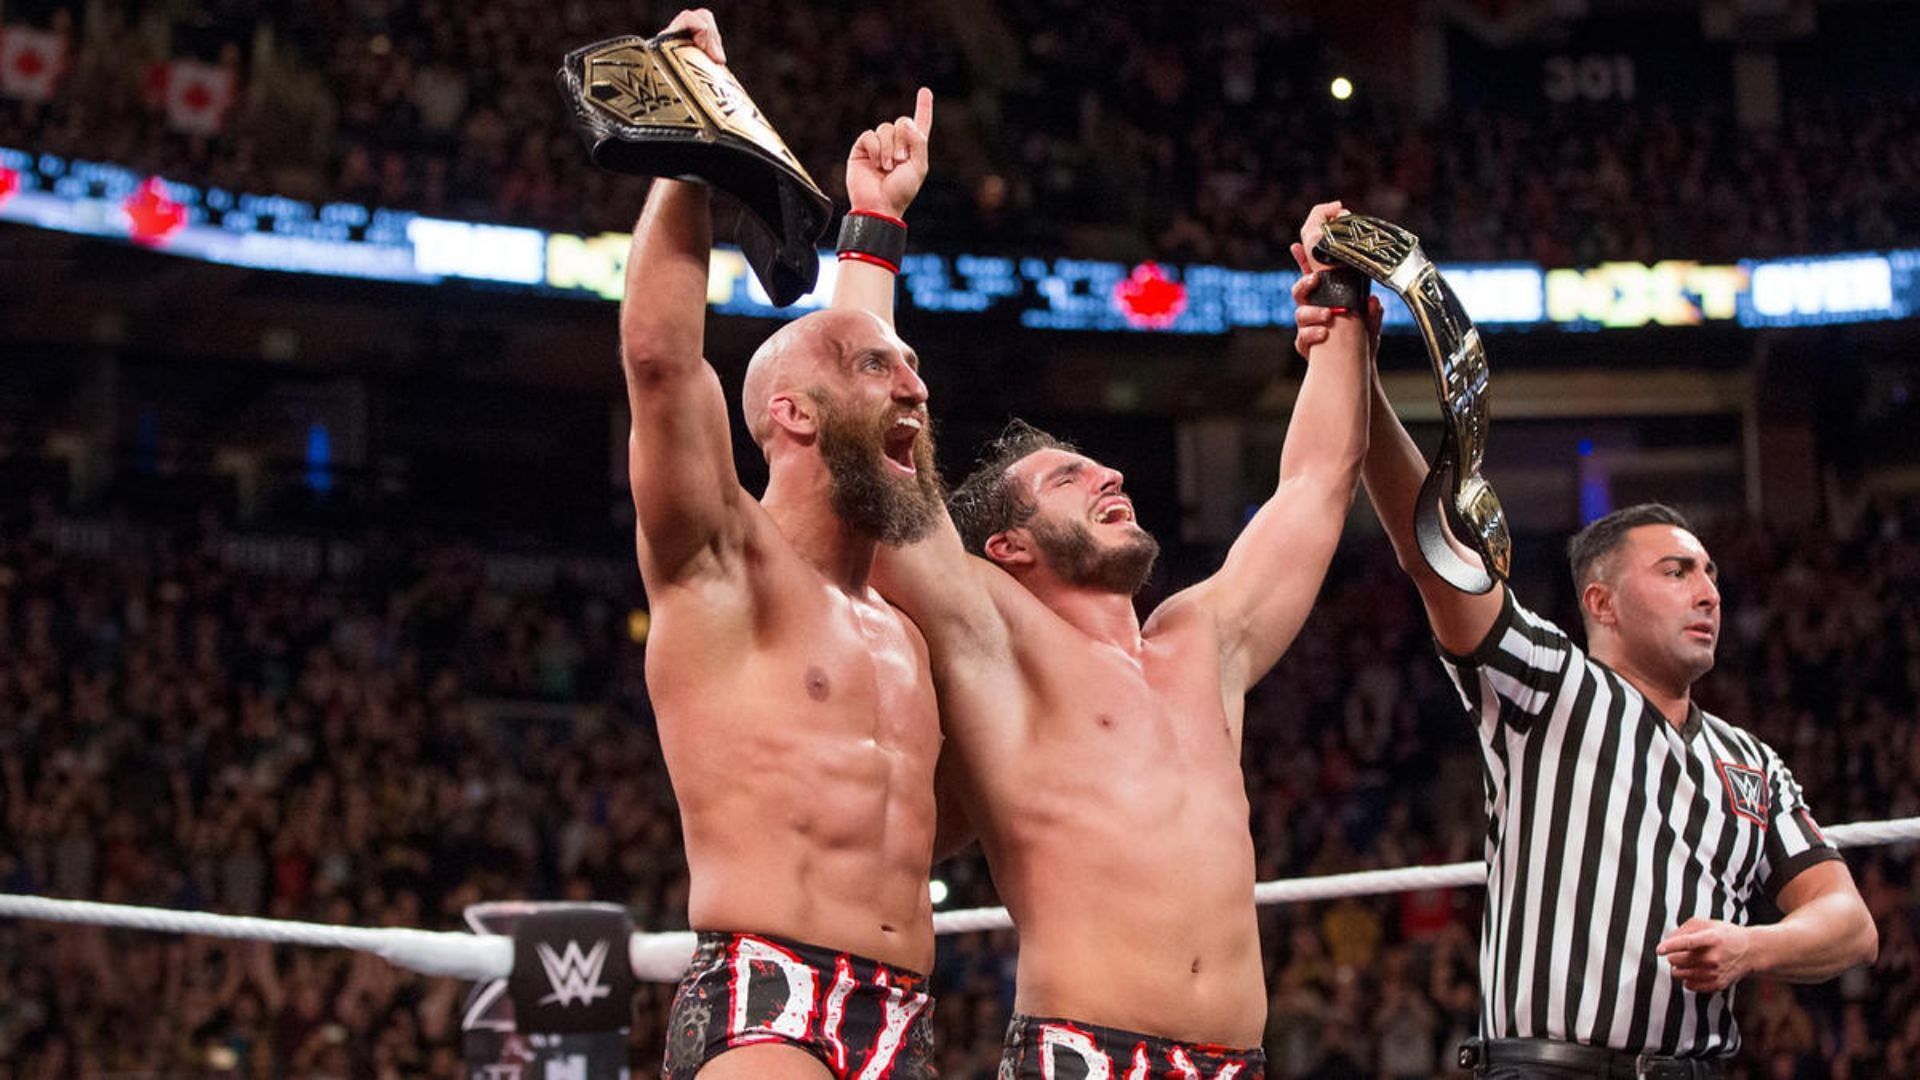 Johnny Gargano and Tomasso Ciampa have been floundering on RAW